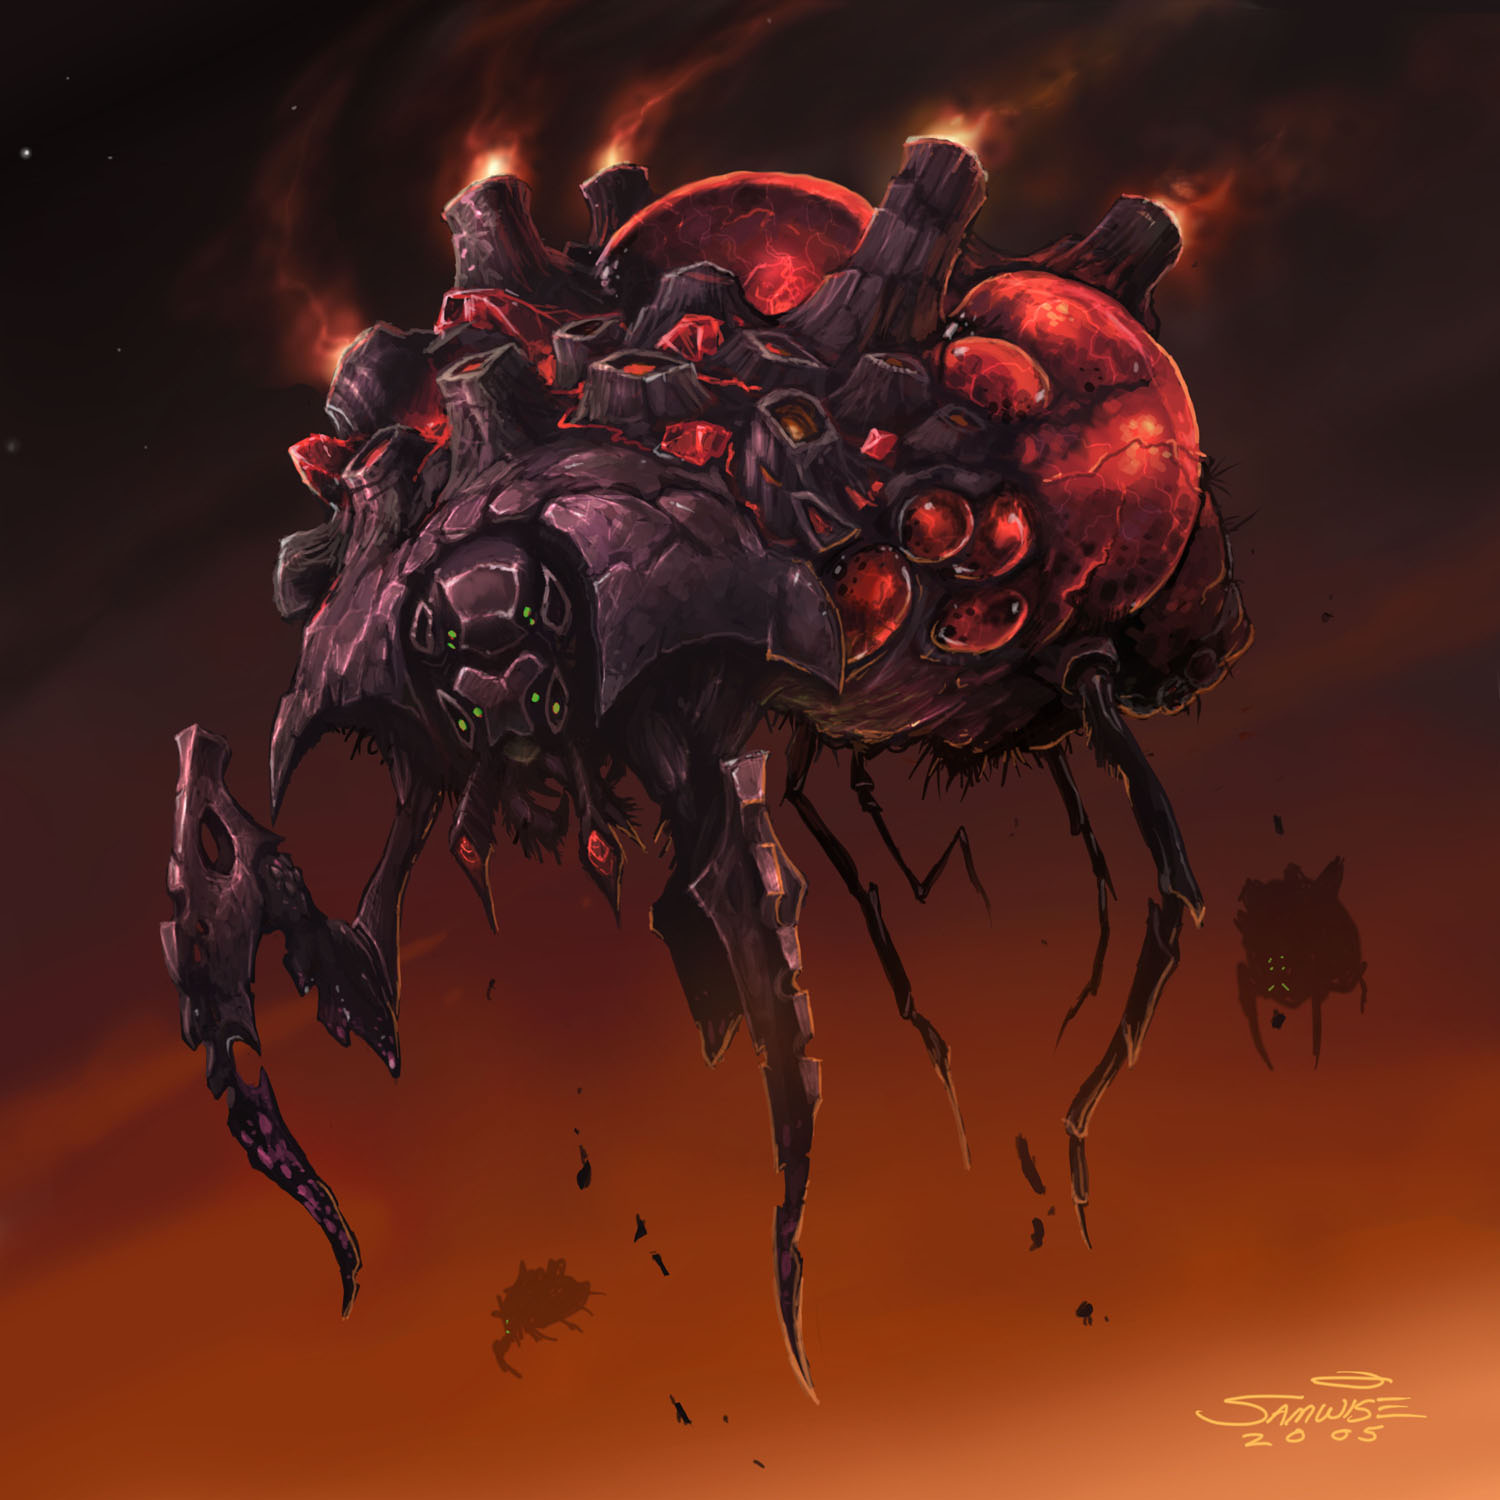 Terran and protoss players should breathe a sigh of relief that this flying "Spore Host" didn't make it into the game.&nbsp;